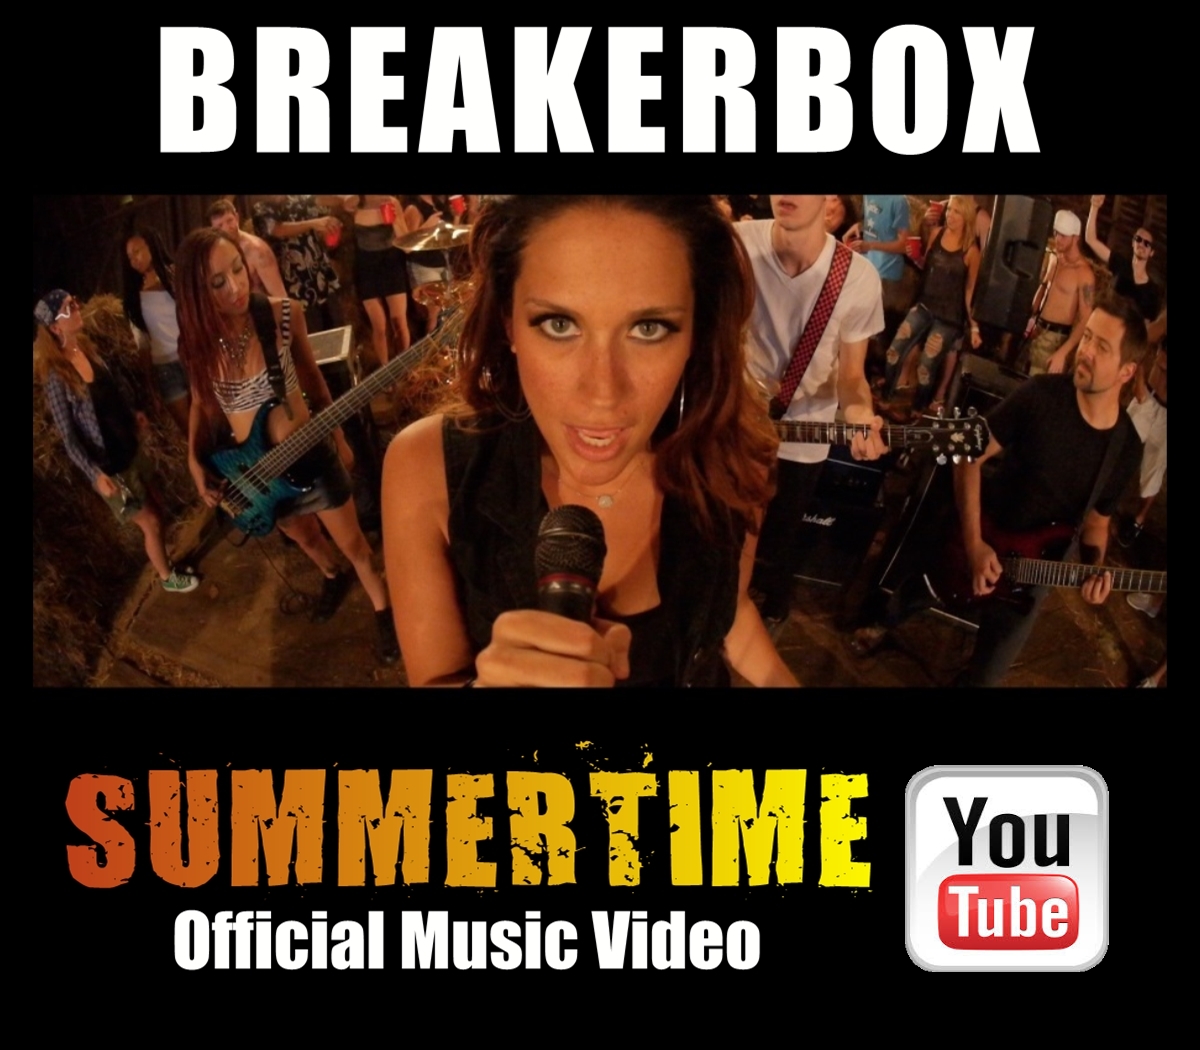 BREAKERBOX "SUMMERTIME" Official Music Video Press Photo 